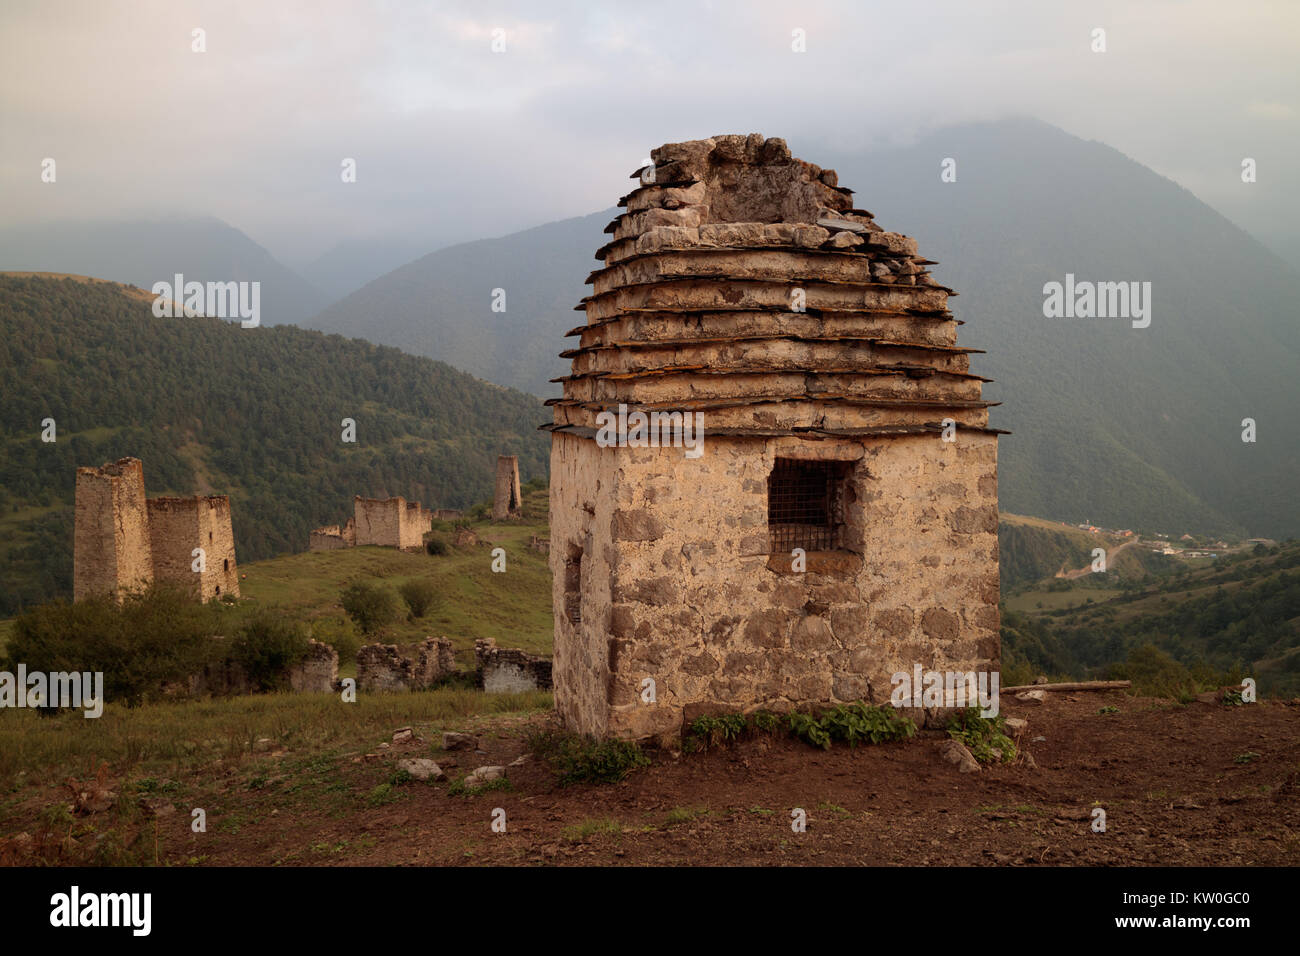 Ancient tombs of medieval architecture in Ingushetia/Chechnya mountains, Caucasus Stock Photo